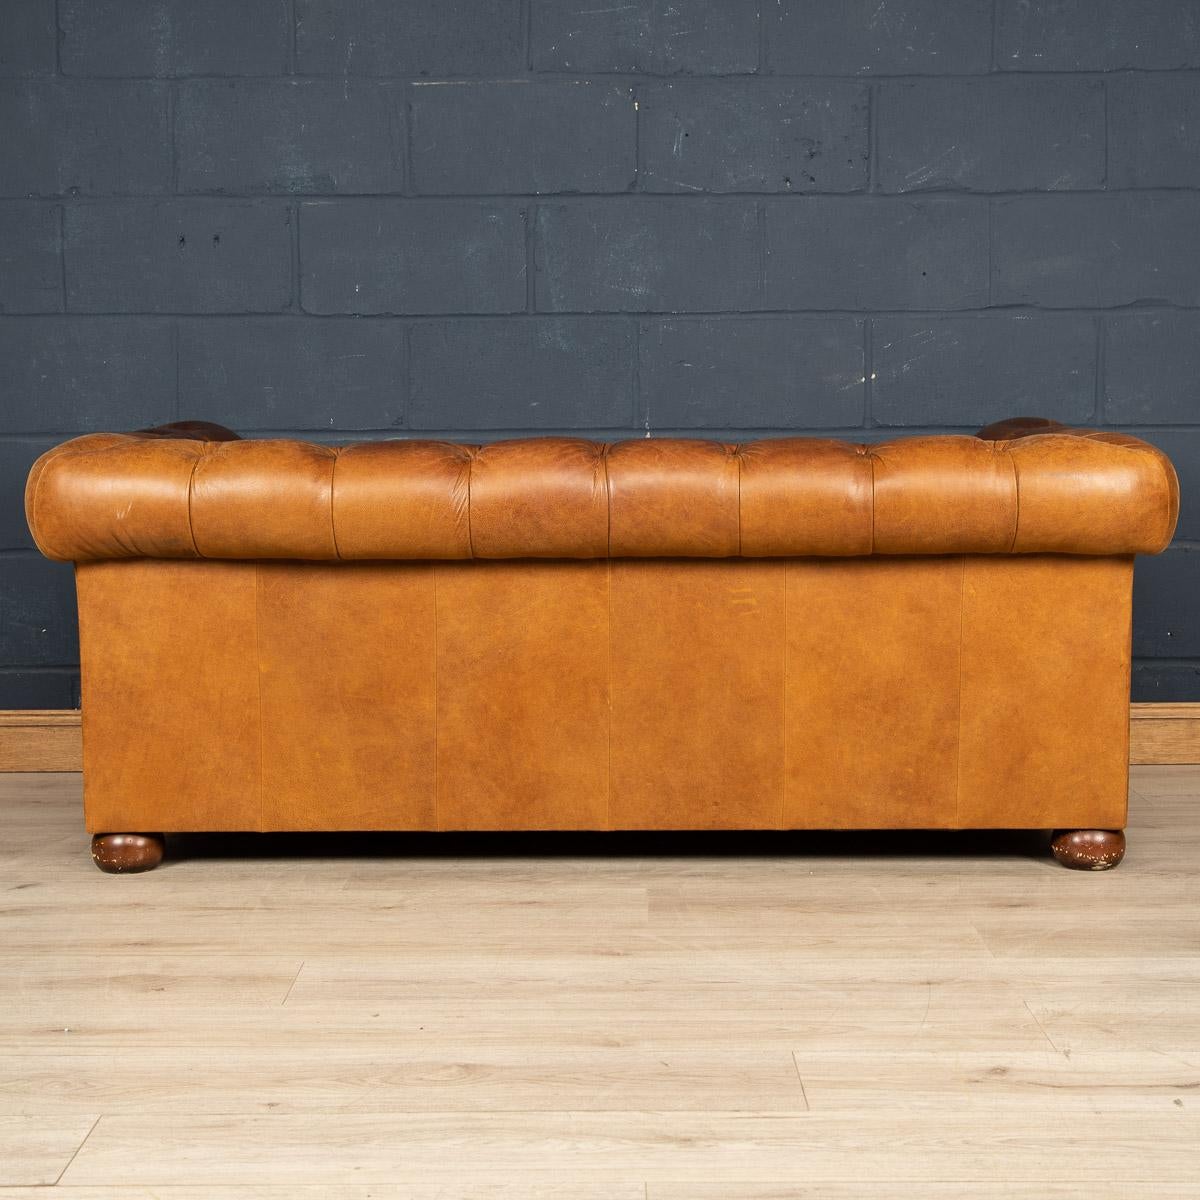 British 20th Century Chesterfield Leather Sofa by Laura Ashley, England, c.1970